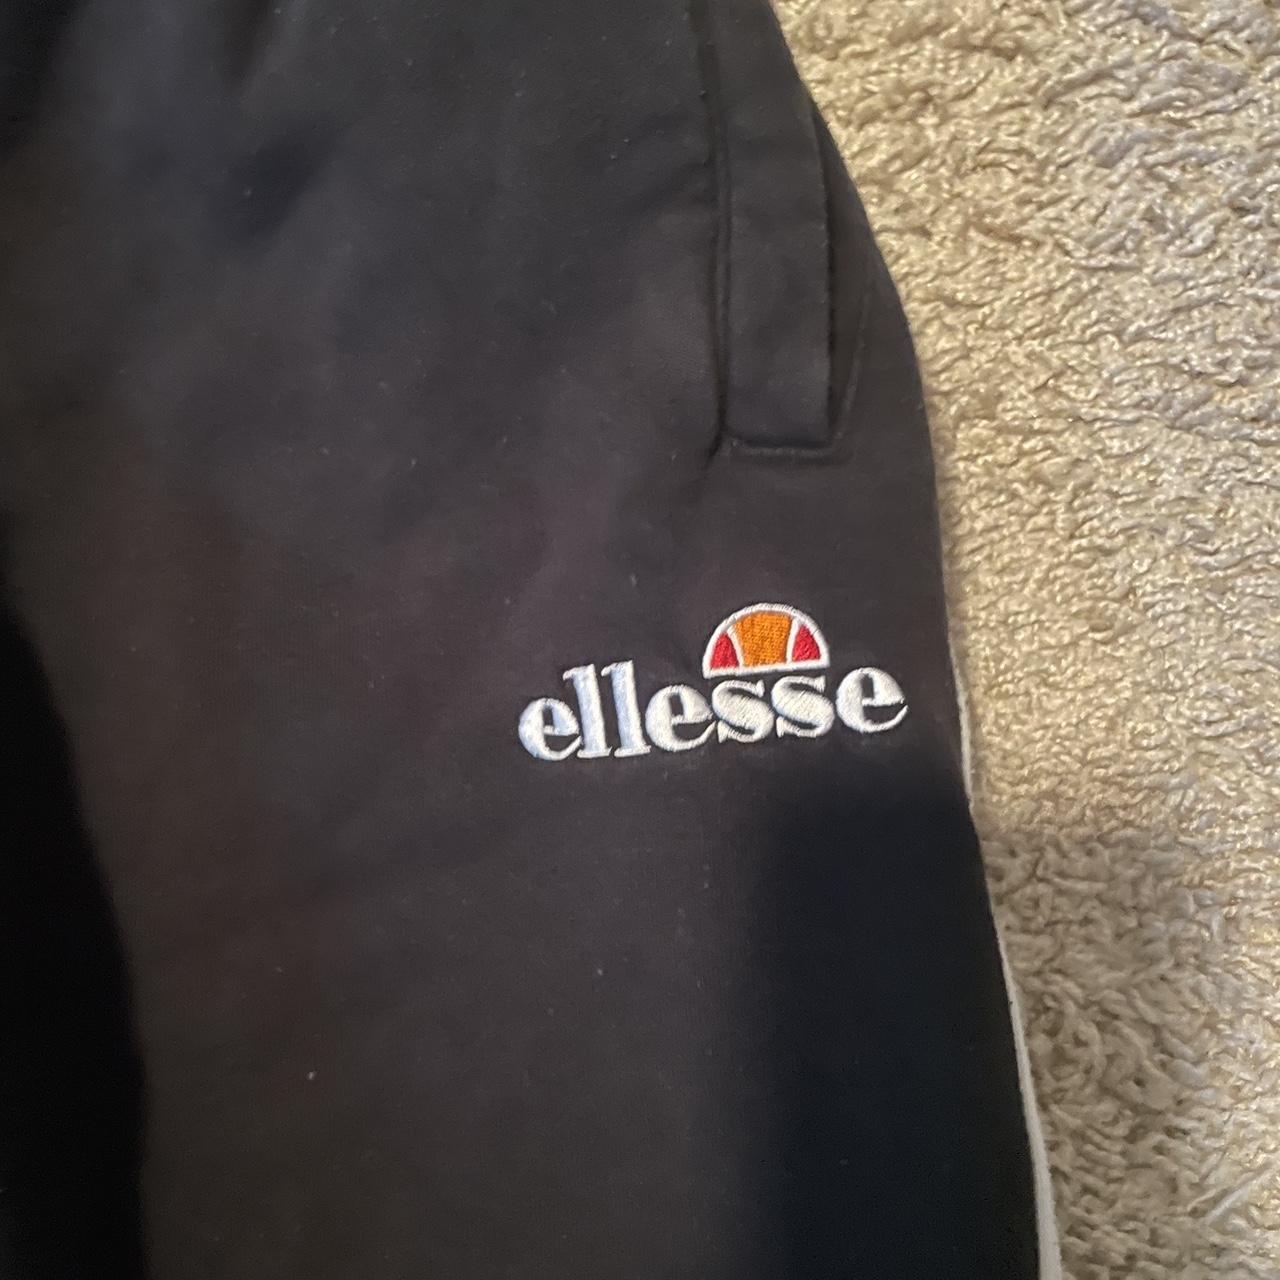 Ellesse Men's Black and White Joggers-tracksuits (3)